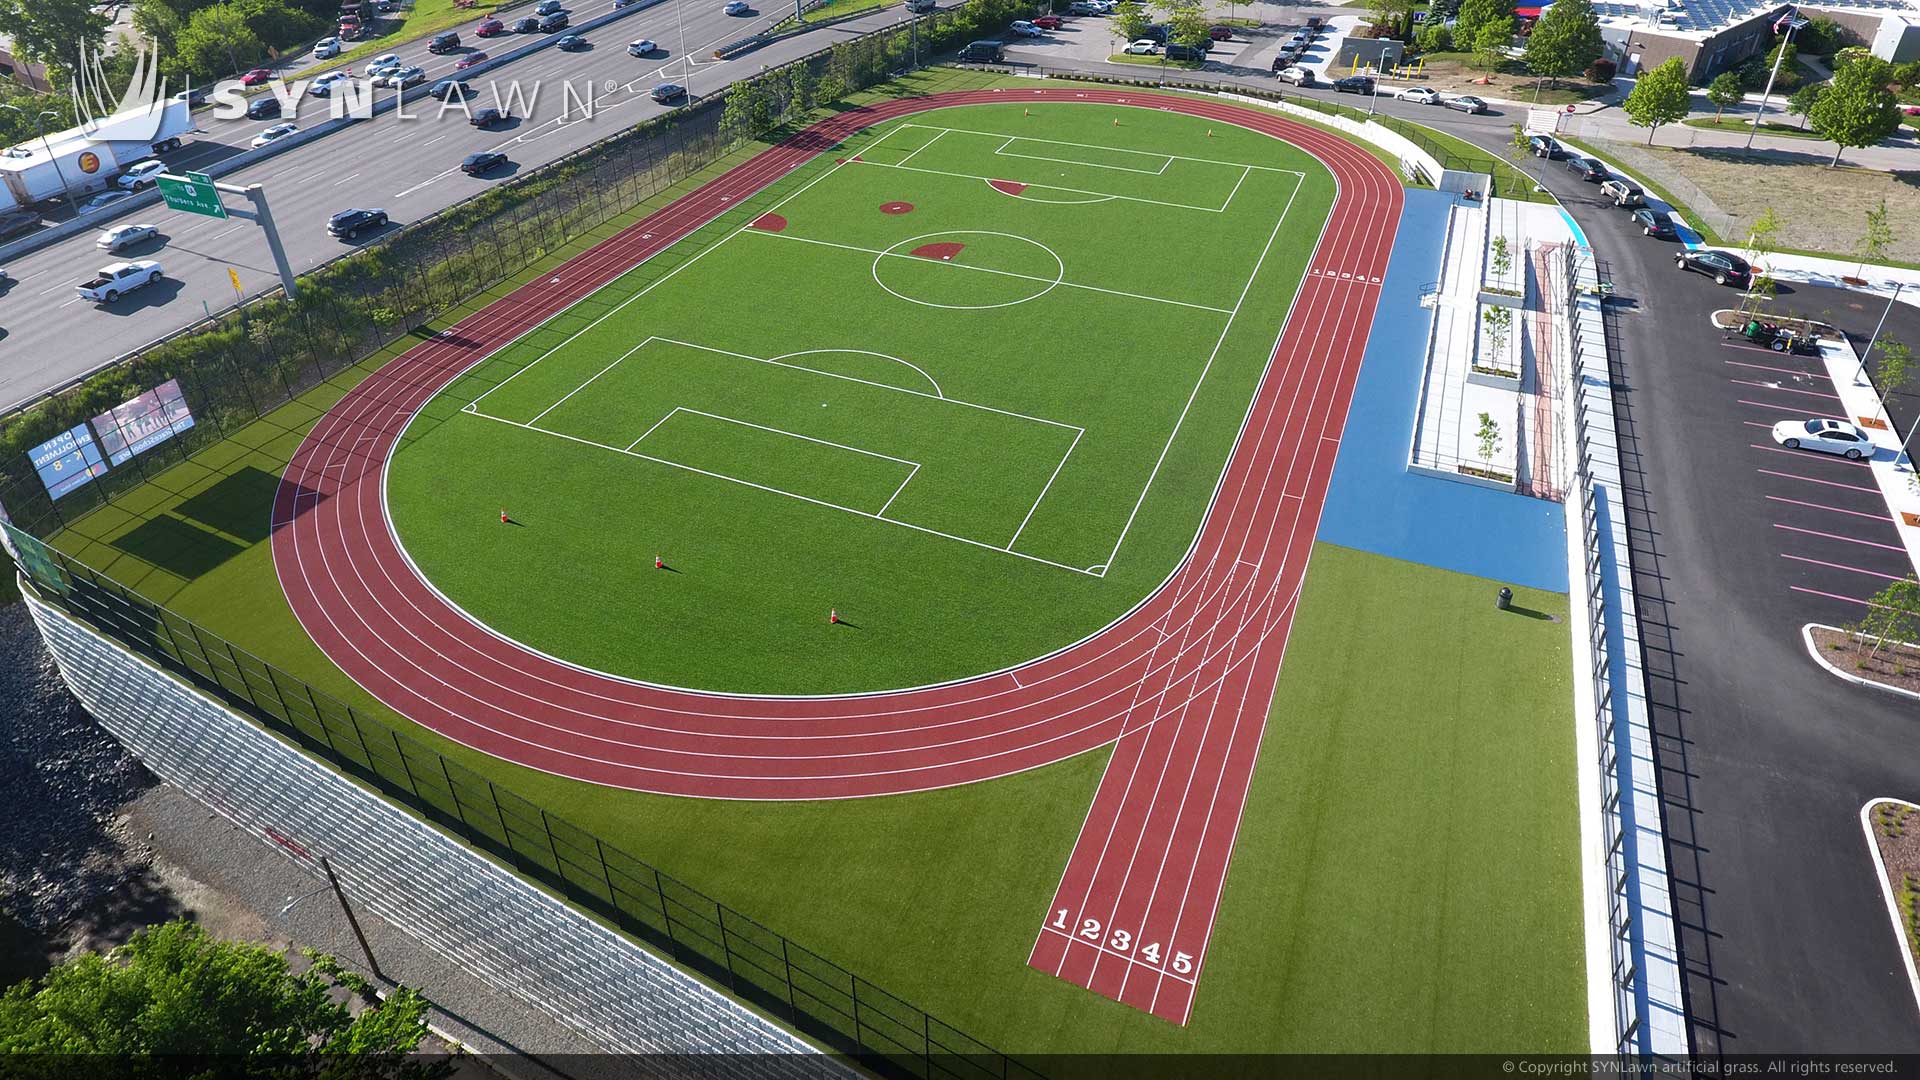 image of SYNLawn artificial grass with running track and field